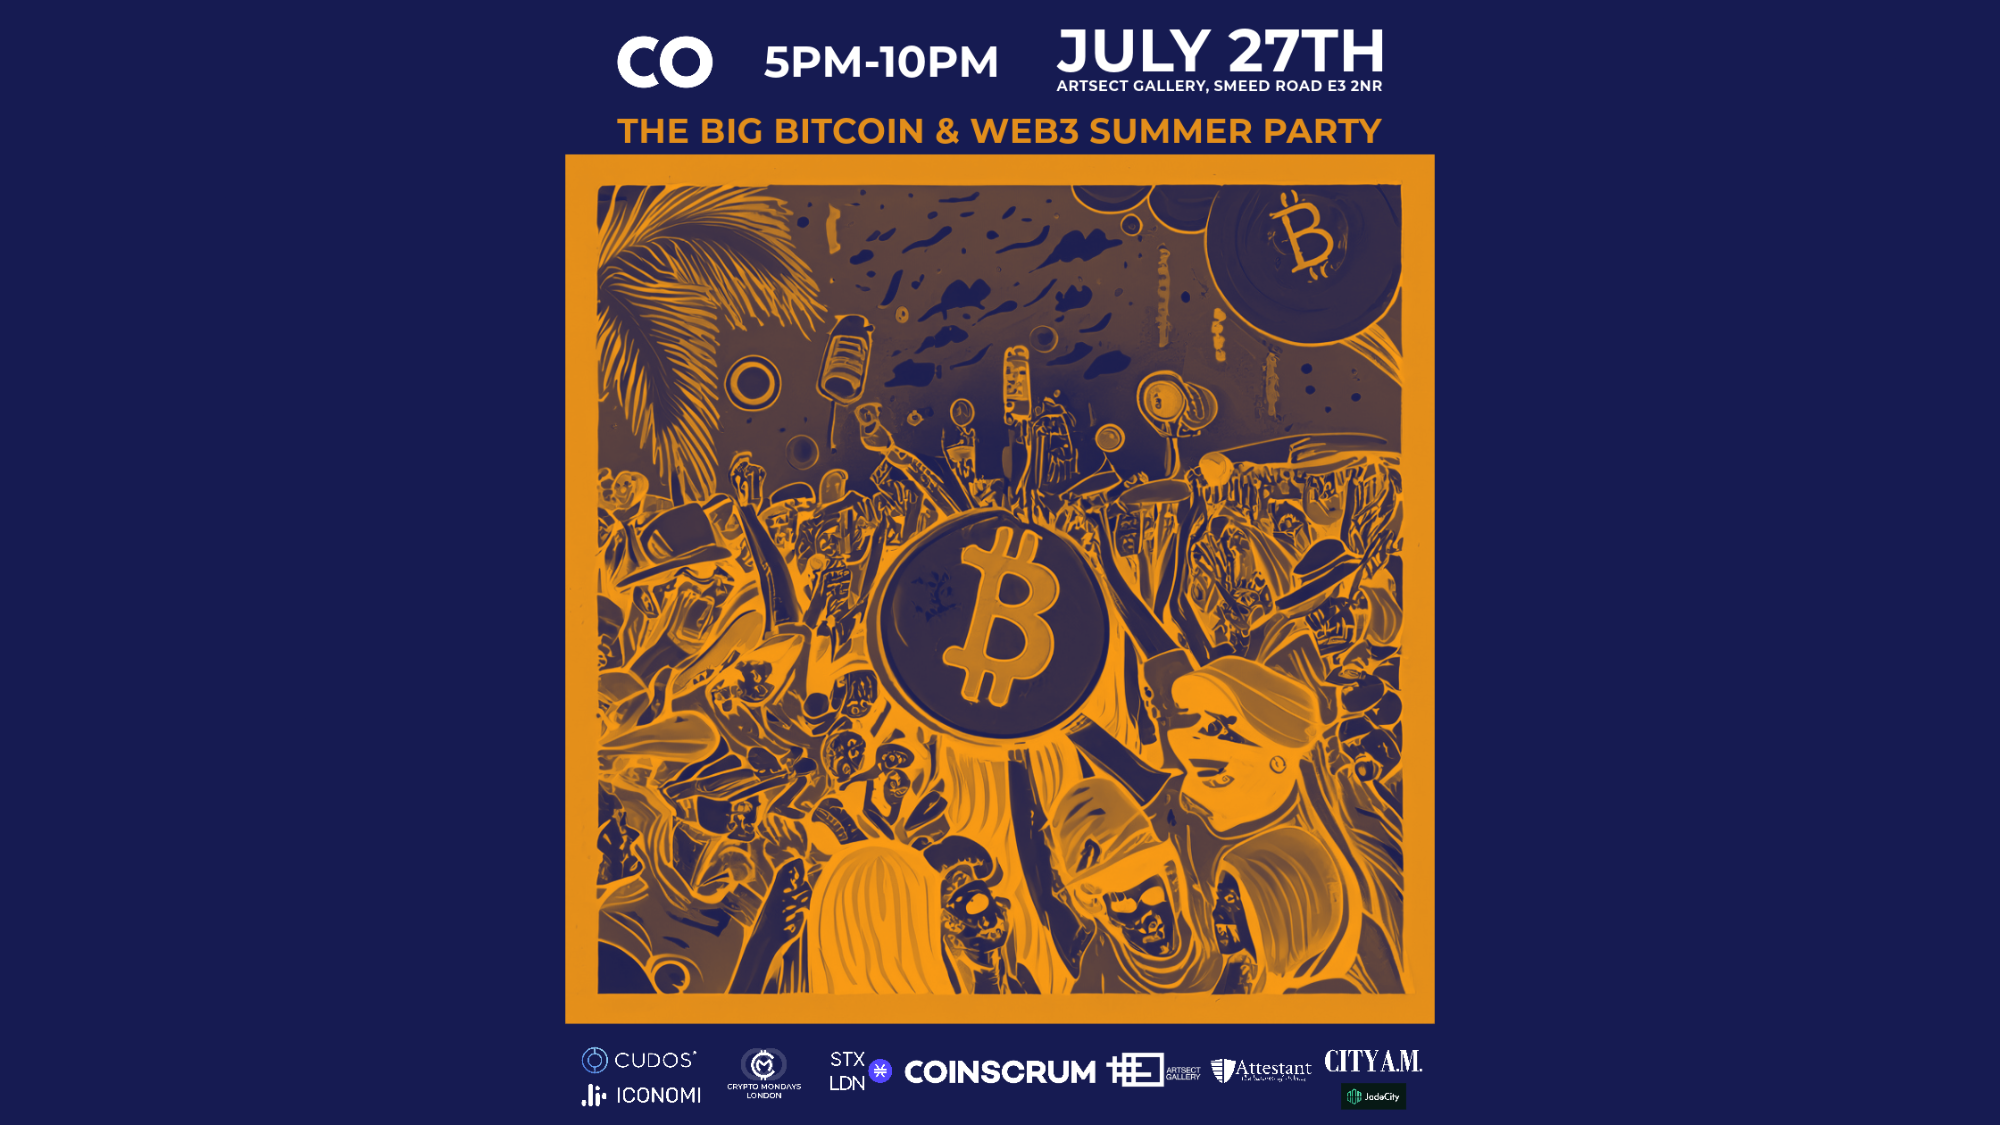 Join The Big Bitcoin & Web3 Summer Party!